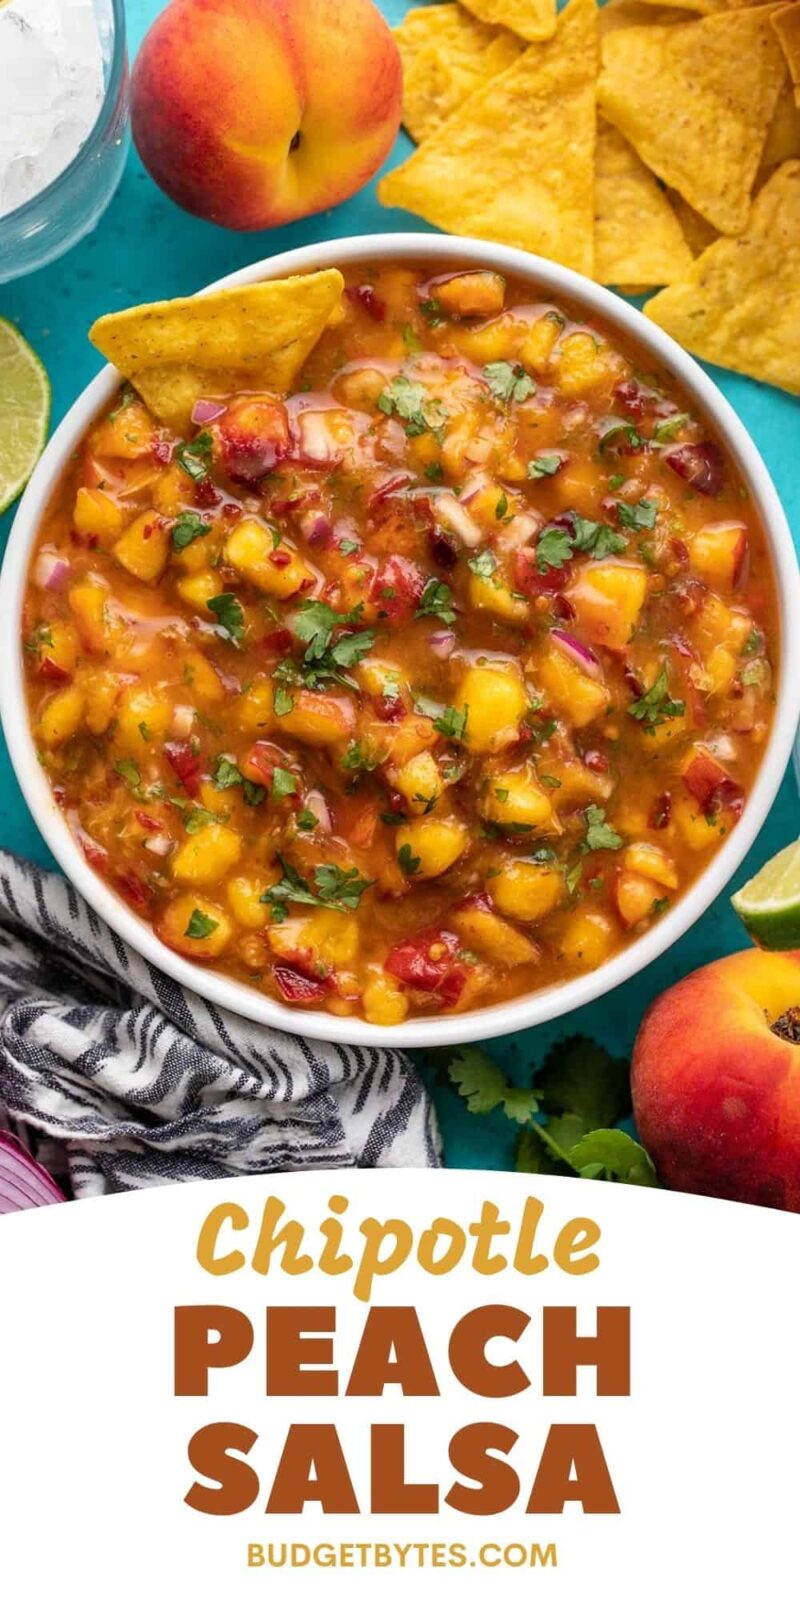 Overhead view of a bowl full of chipotle peach salsa.